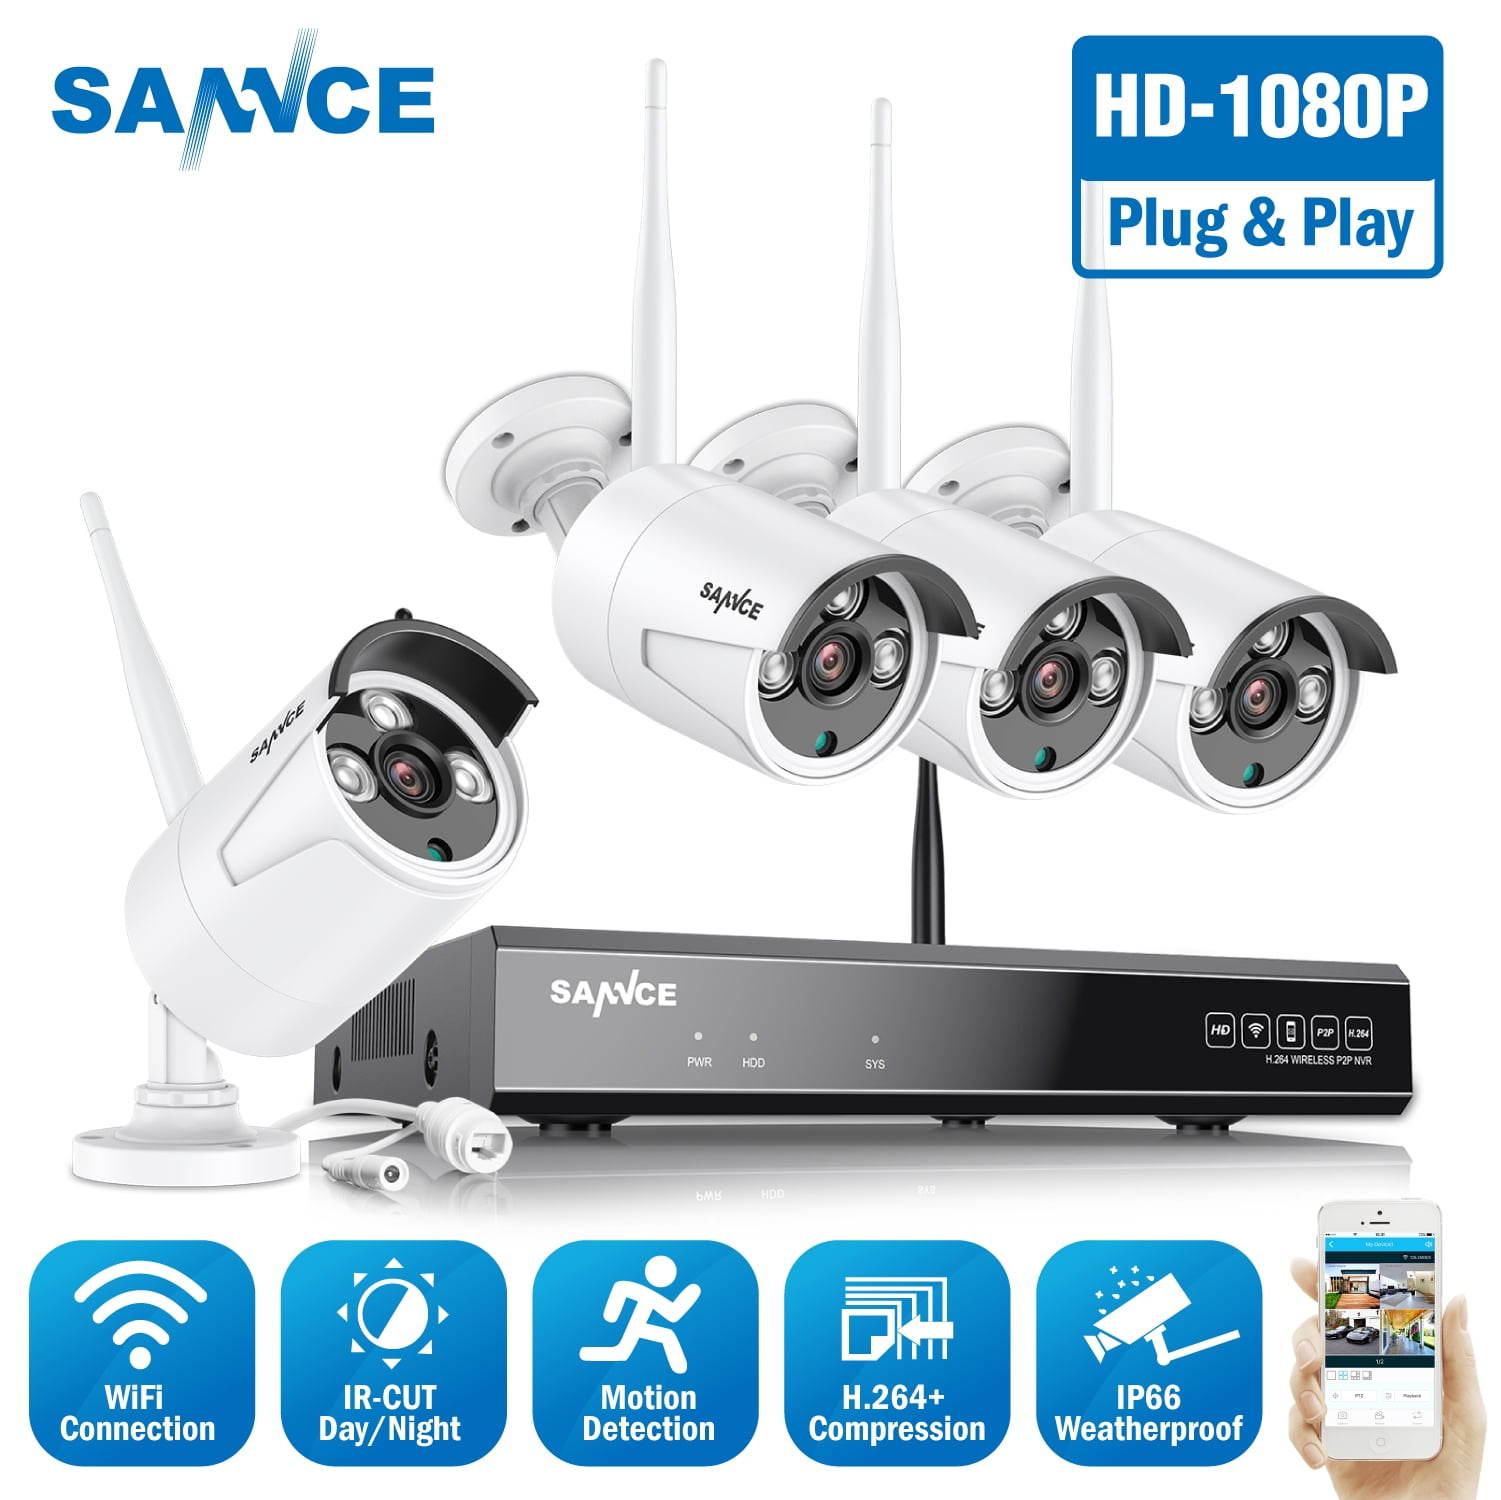 Night Owl WMBF445720 720p Security Camera System for sale online 